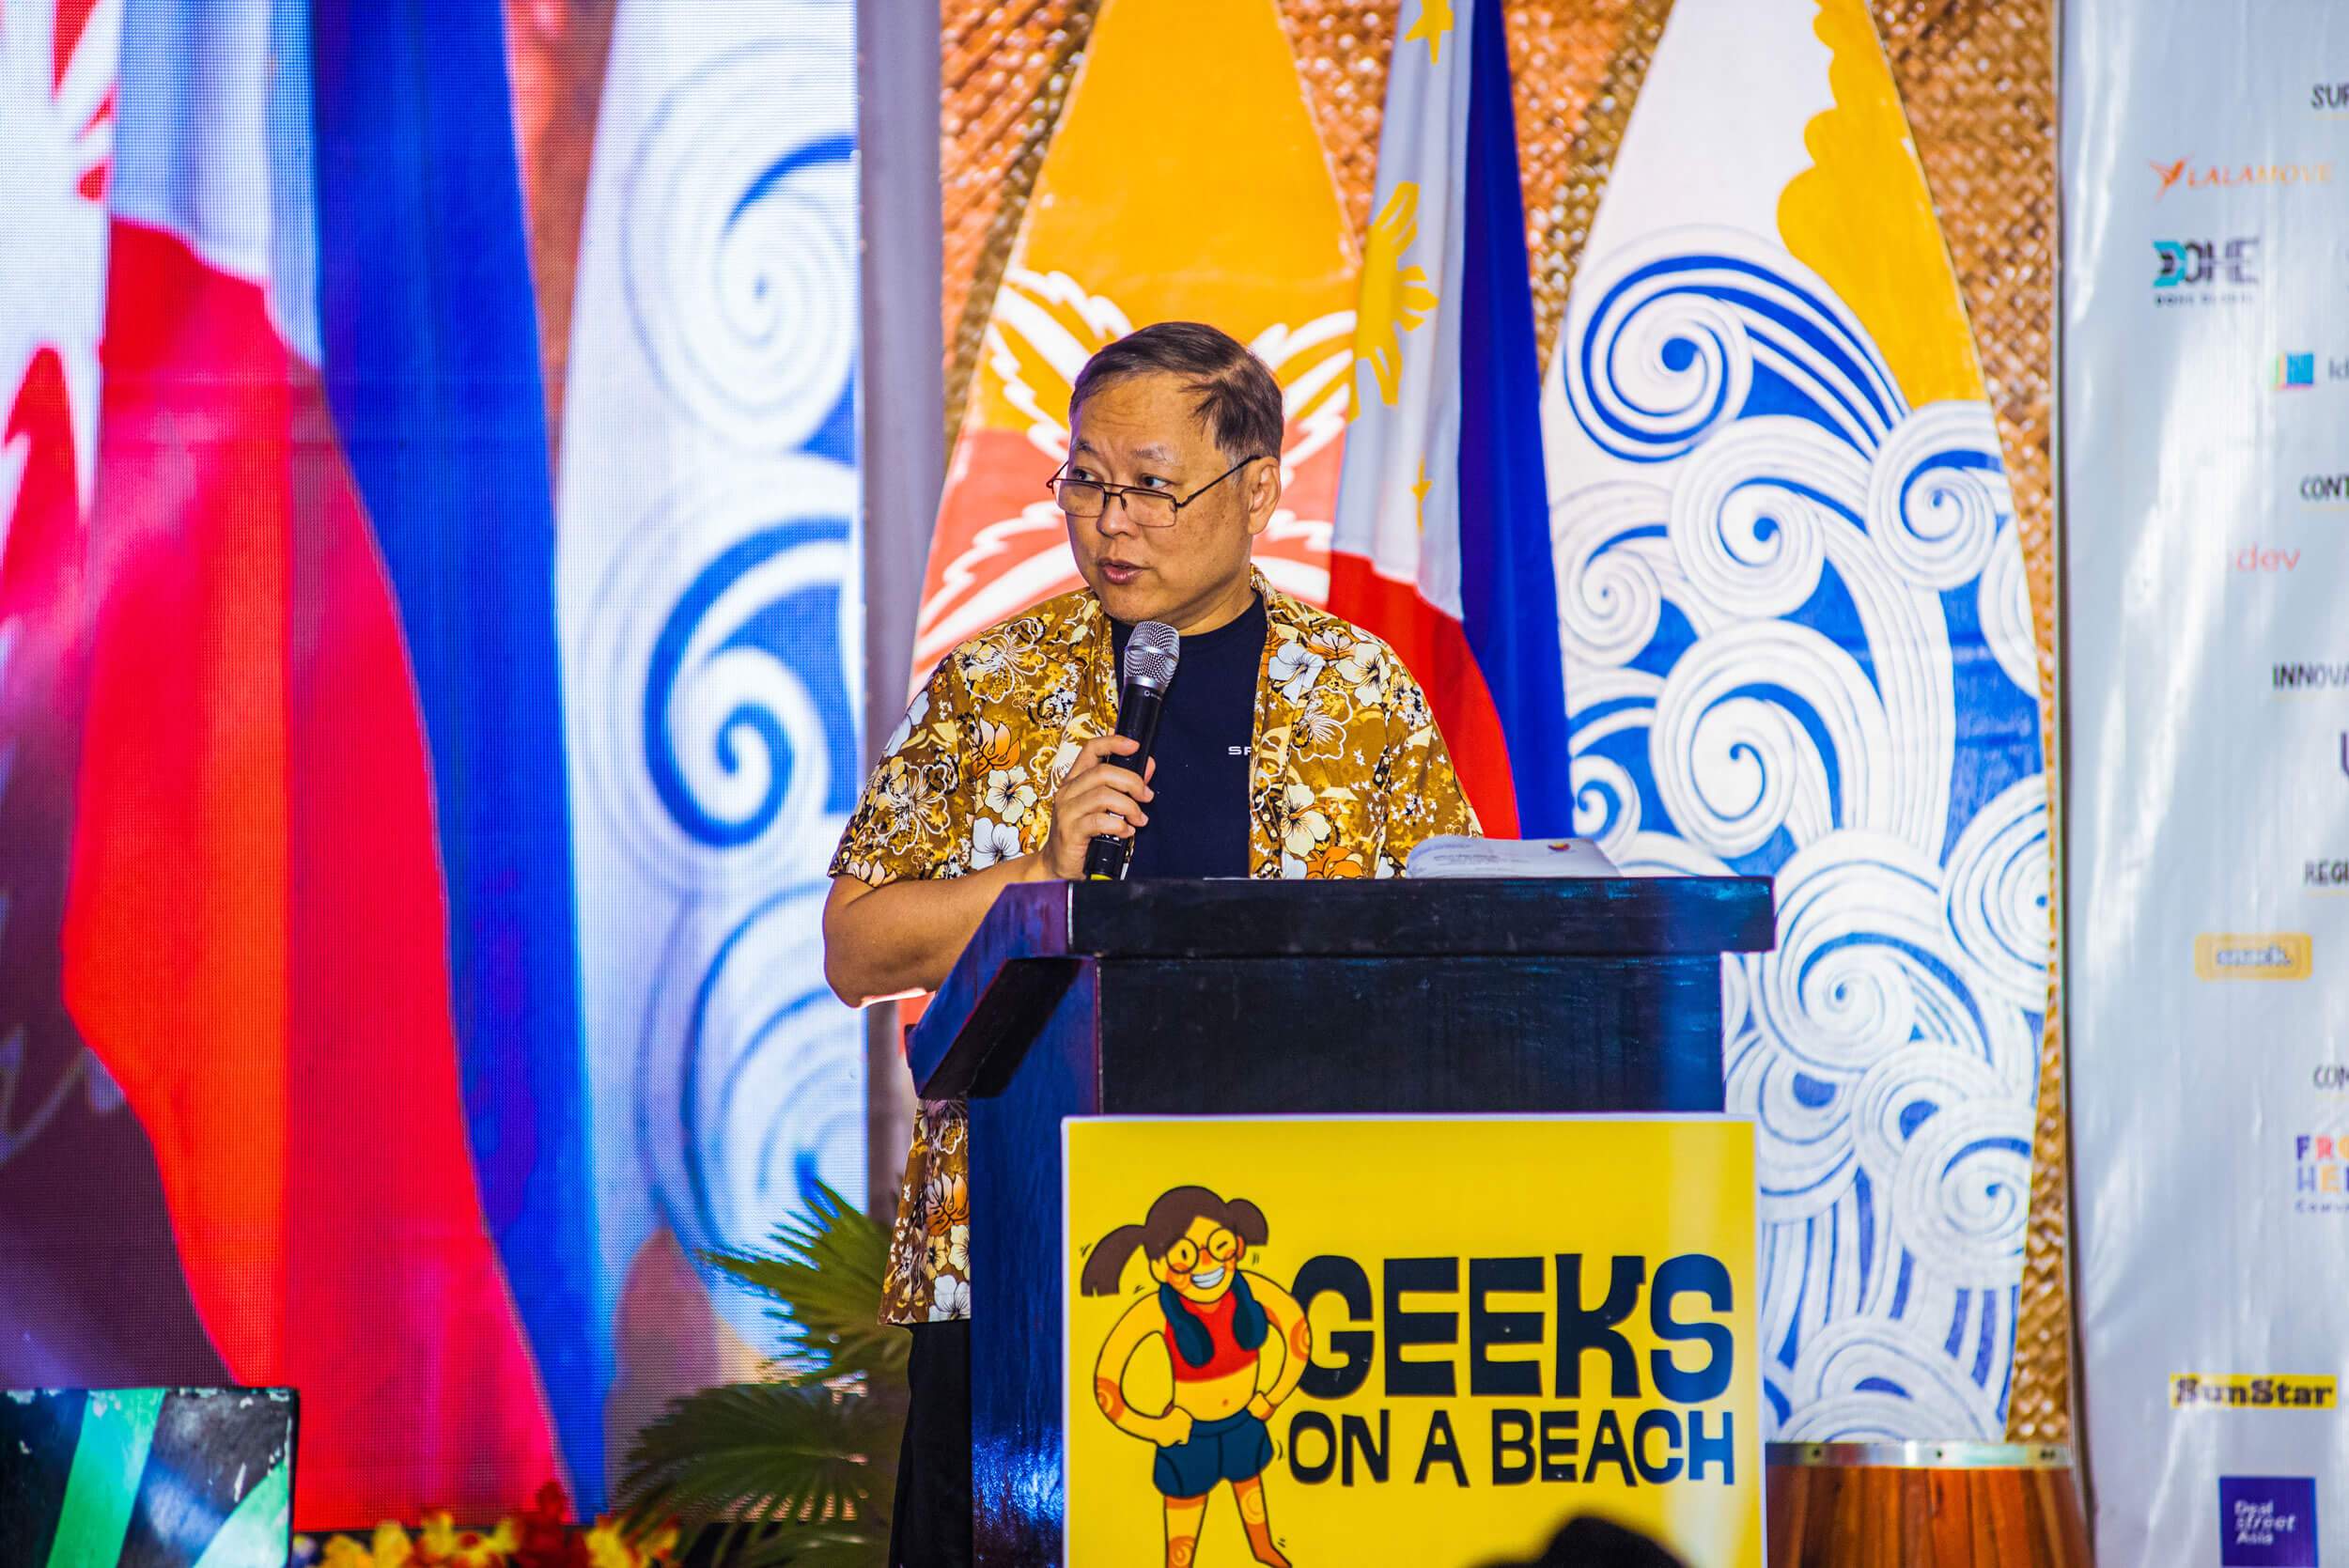 Department of Information and Communications Technology Secretary Ivan John Uy speaks during the opening of Geeks On A Beach in Panglao, Bohol.